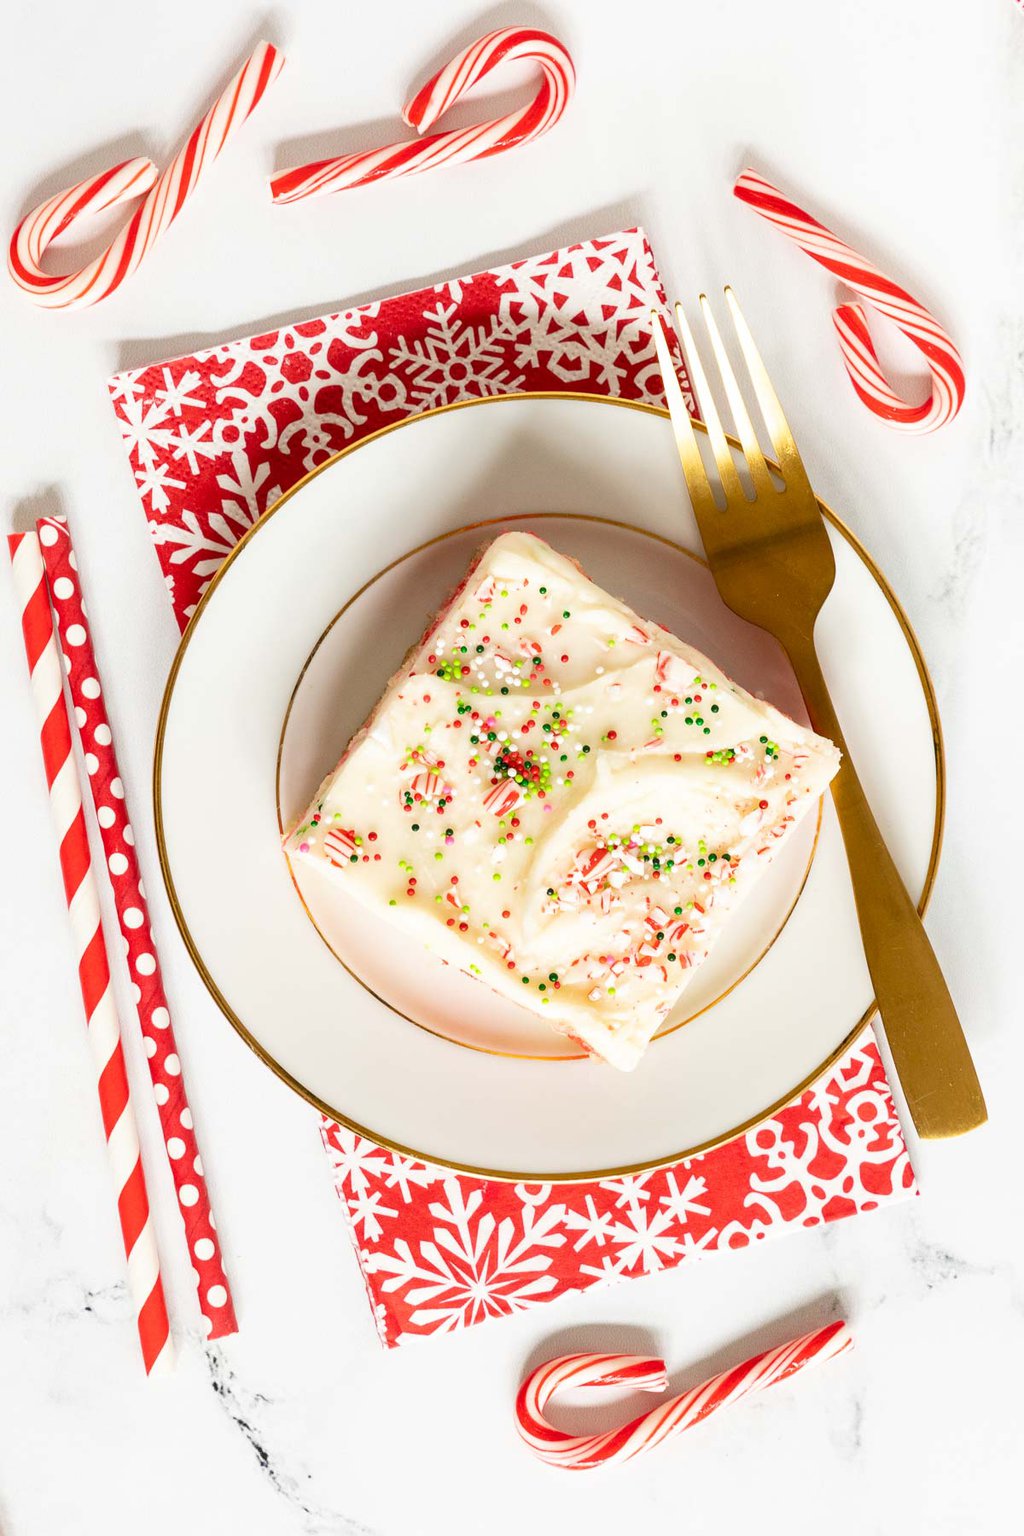 Overhead vertical photo of a slice of Ridiculously Easy Candy Cane Sheet Cake on a white and gold serving plate with colorful Christmas candy canes and straws.